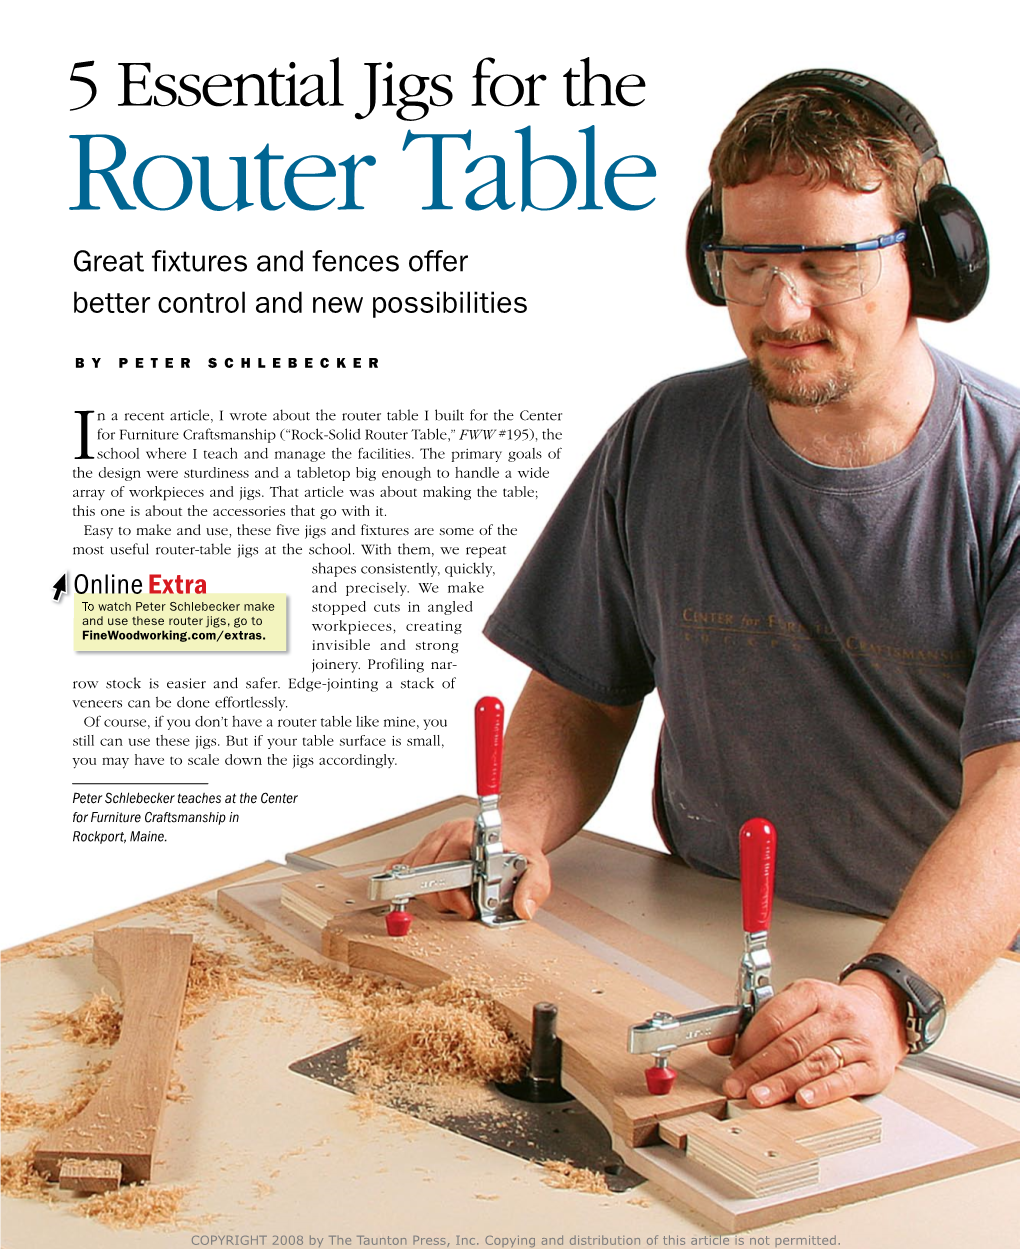 5 Essential Jigs for the Router Table Great Fixtures and Fences Offer Better Control and New Possibilities